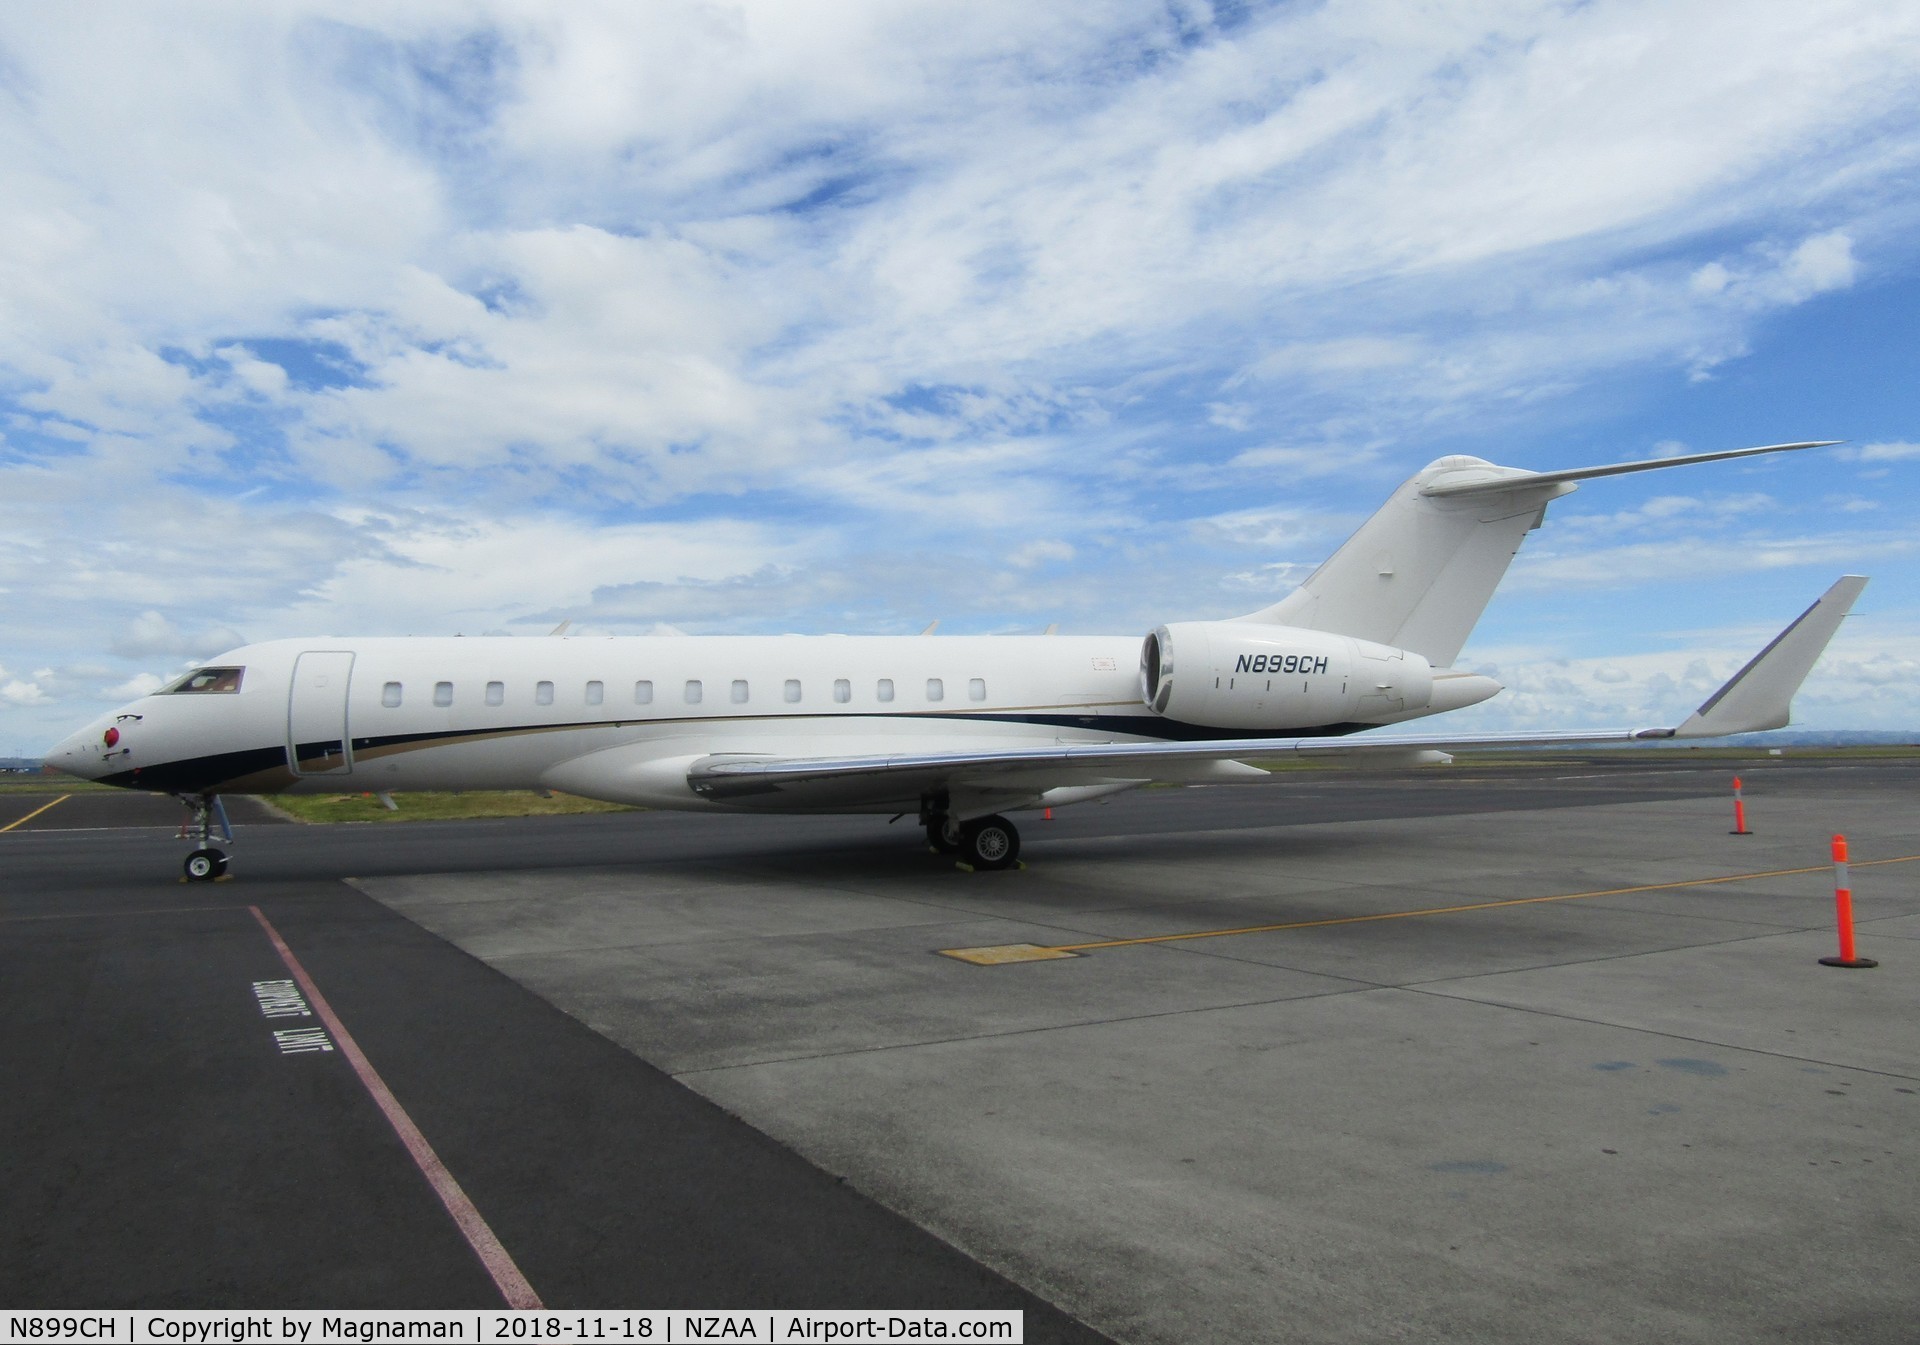 N899CH, 2010 Bombardier BD-700-1A10 Global Express C/N 9390, on stand at AKL